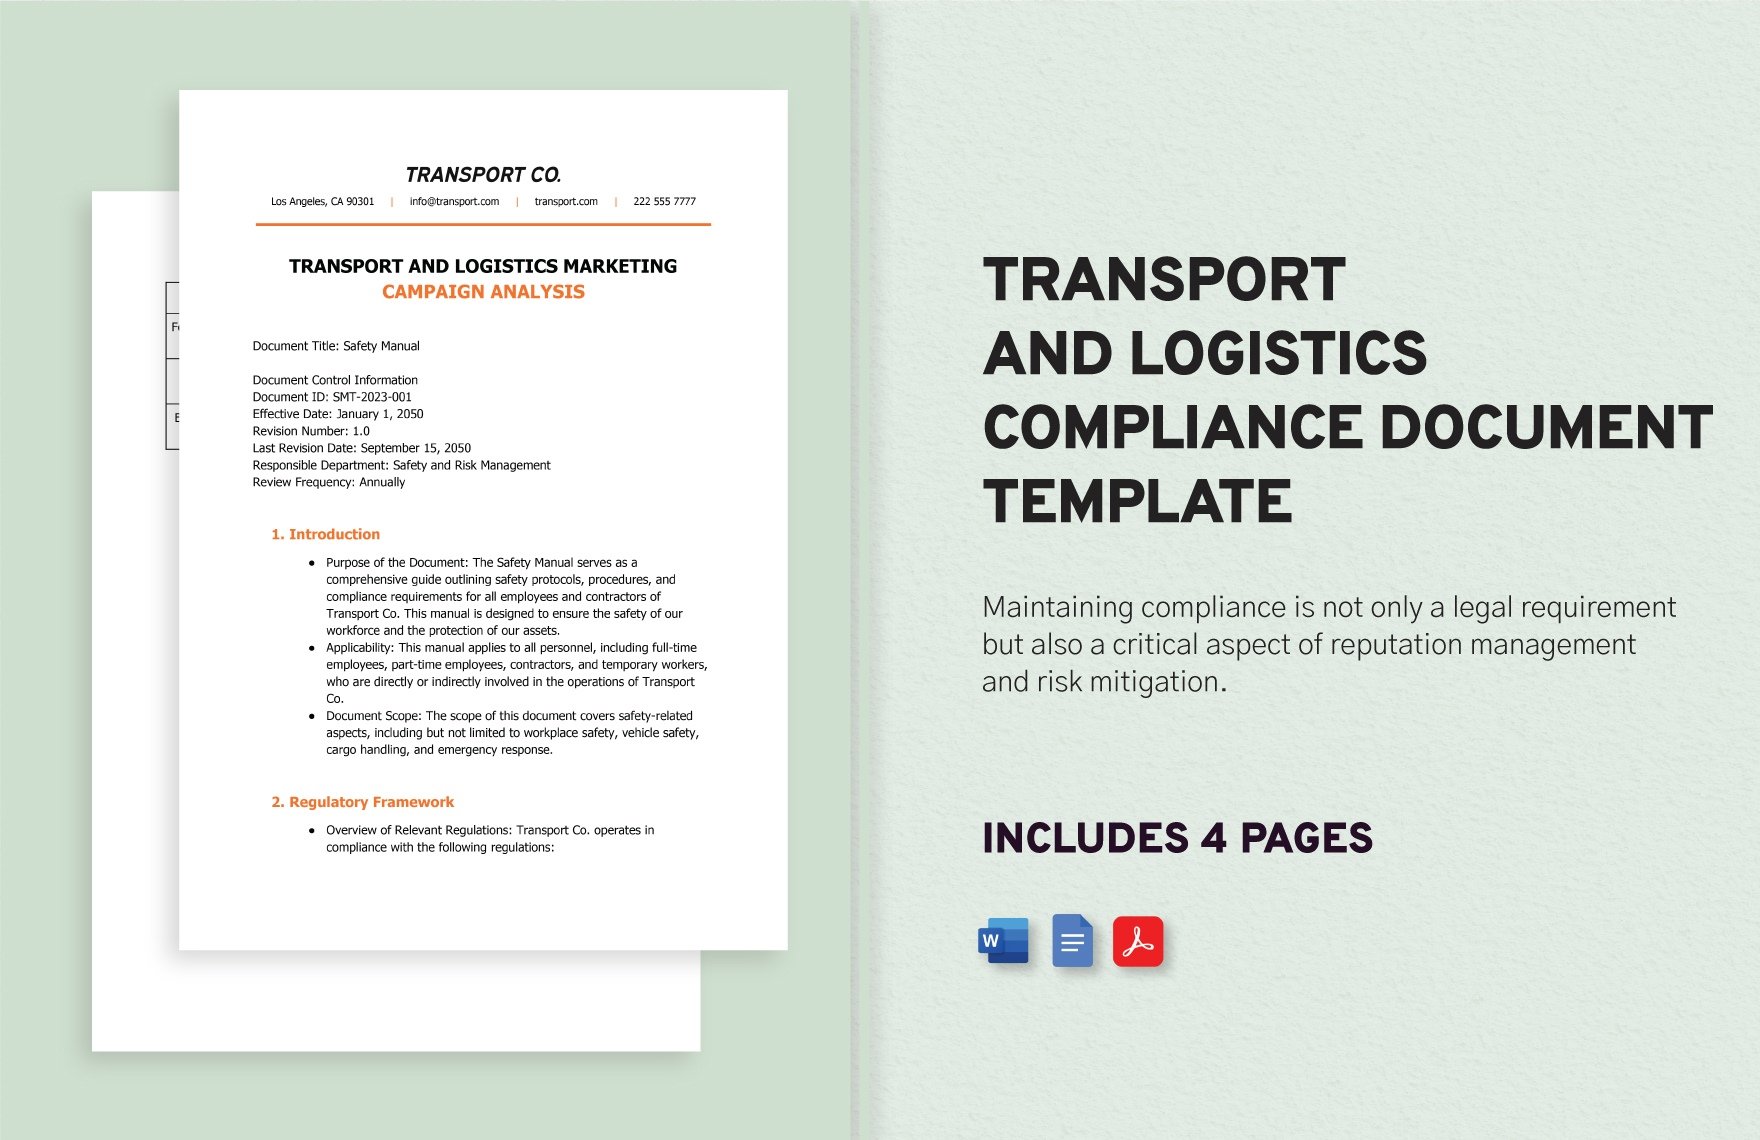 Transport and Logistics Compliance Document Template in Word, Google Docs, PDF